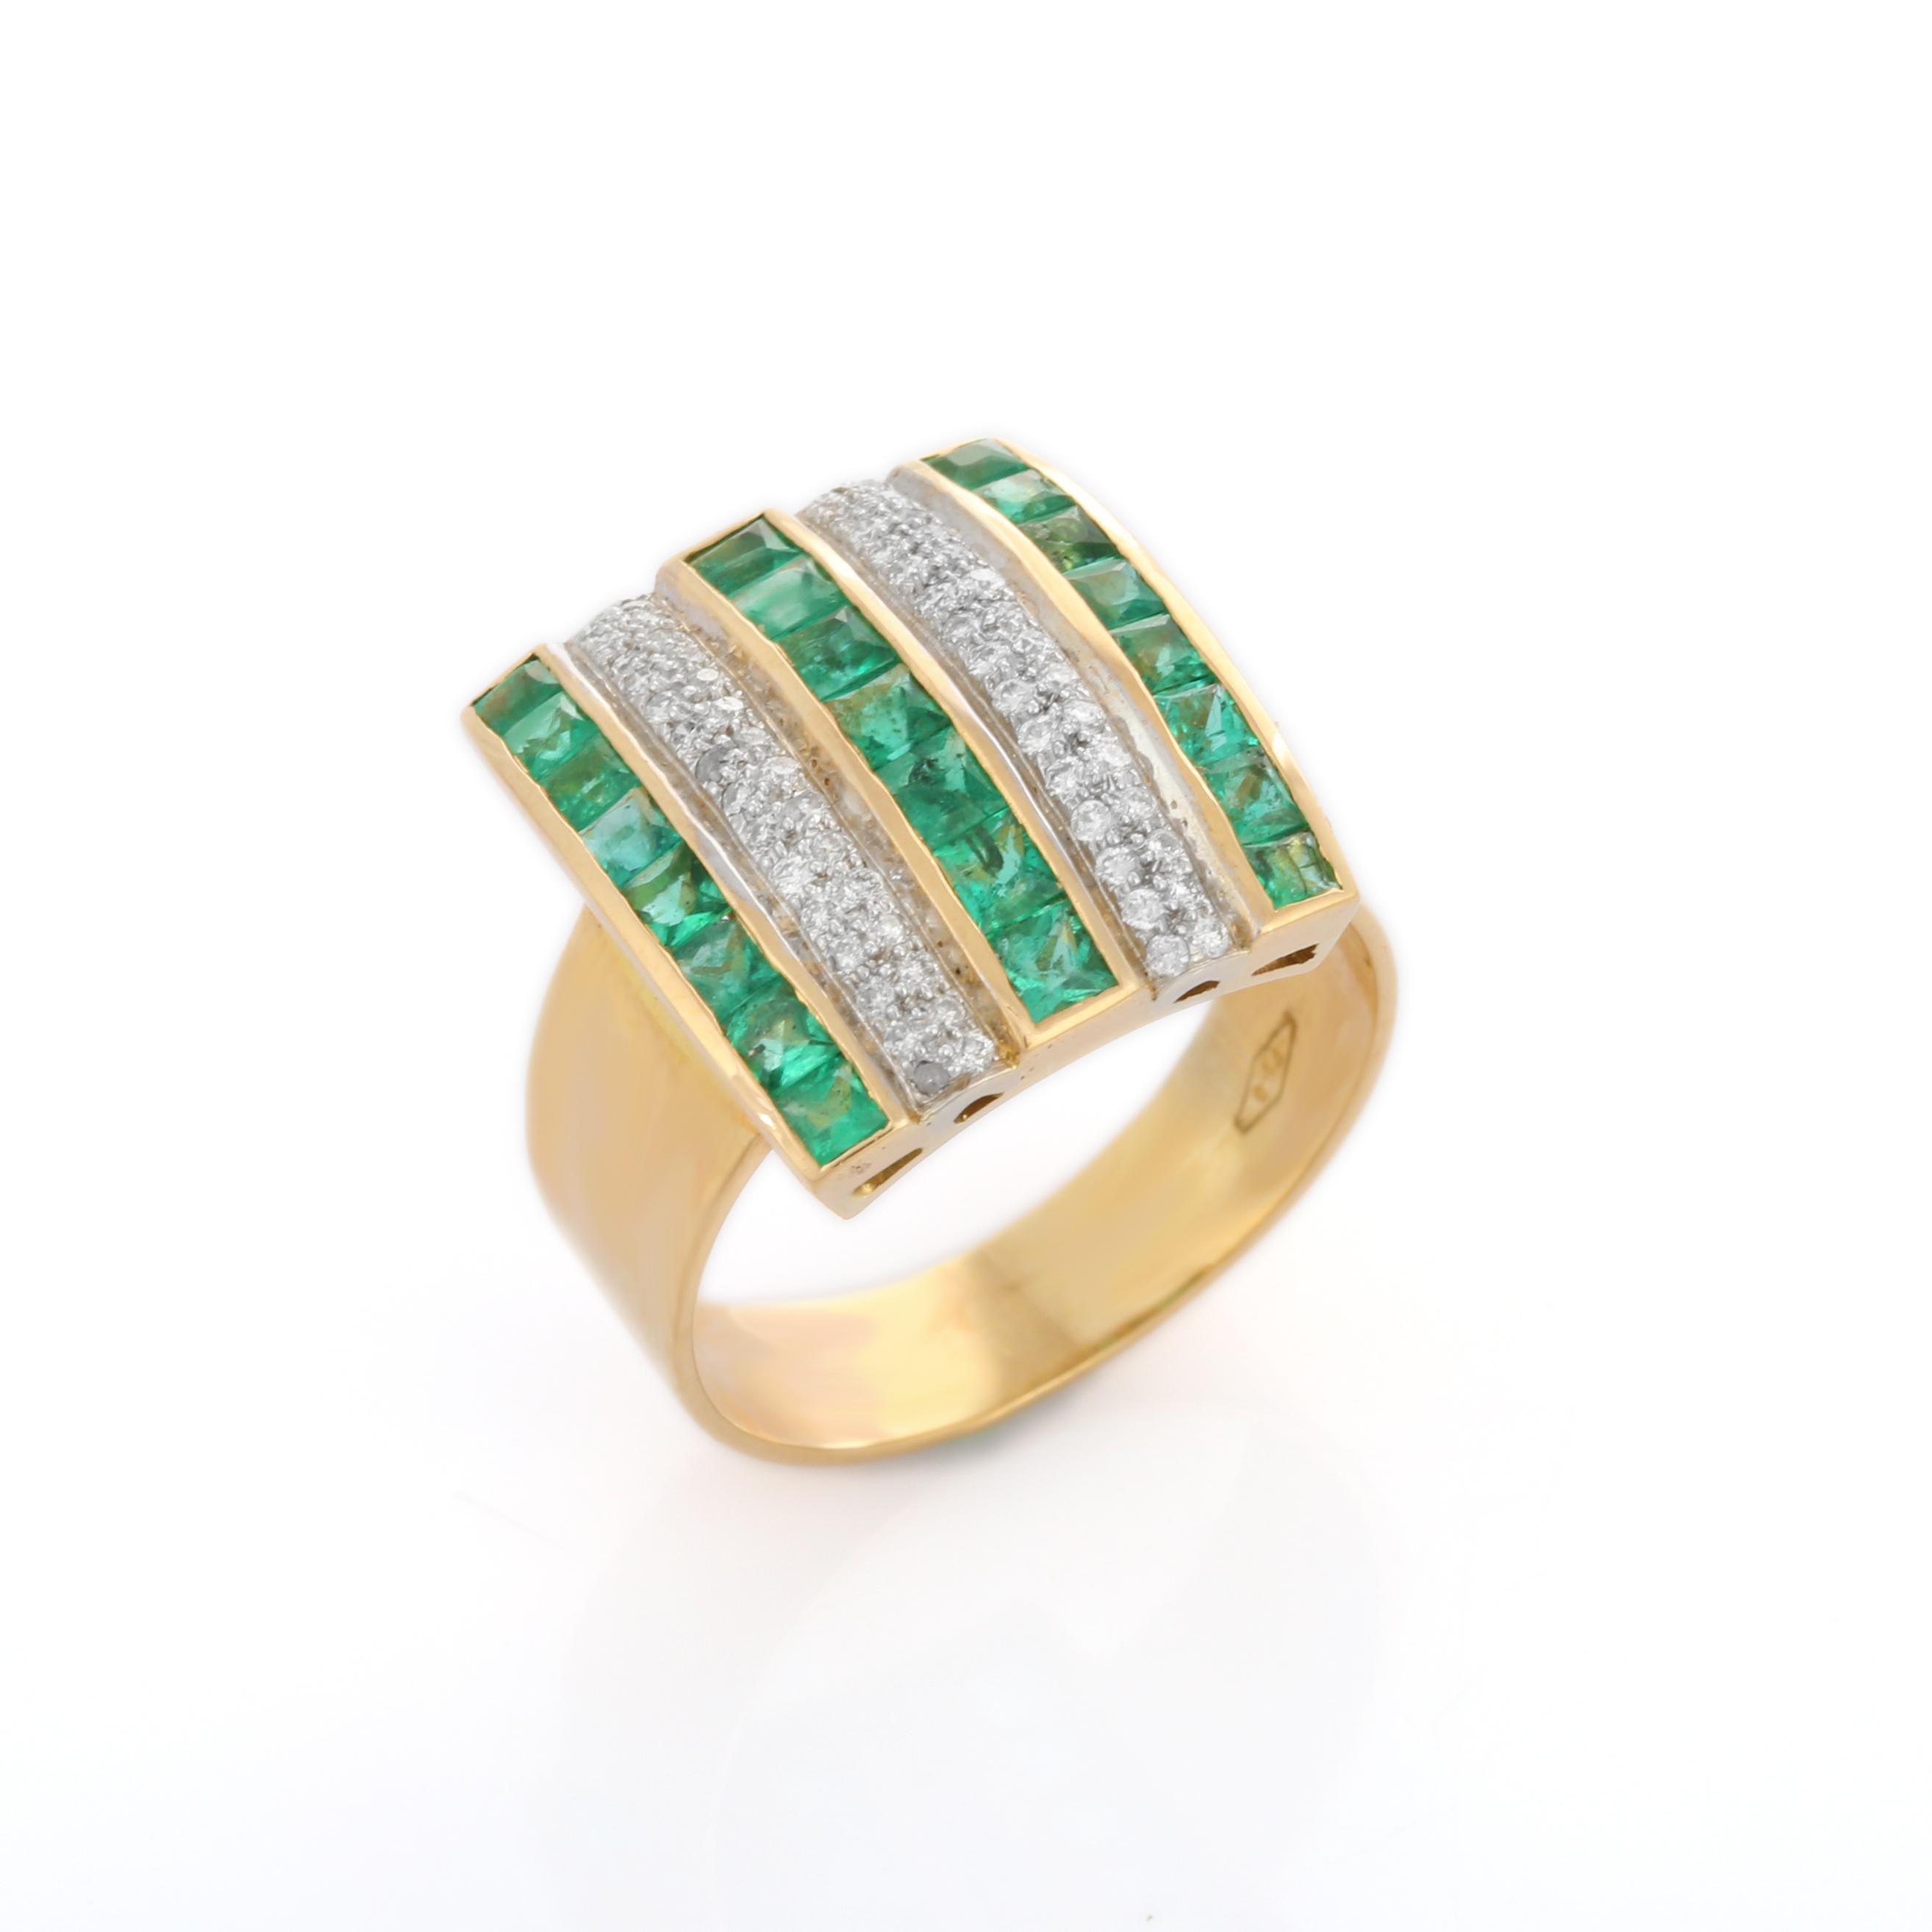 For Sale:  18K Yellow Gold Emerald and Diamond Wedding Ring 3